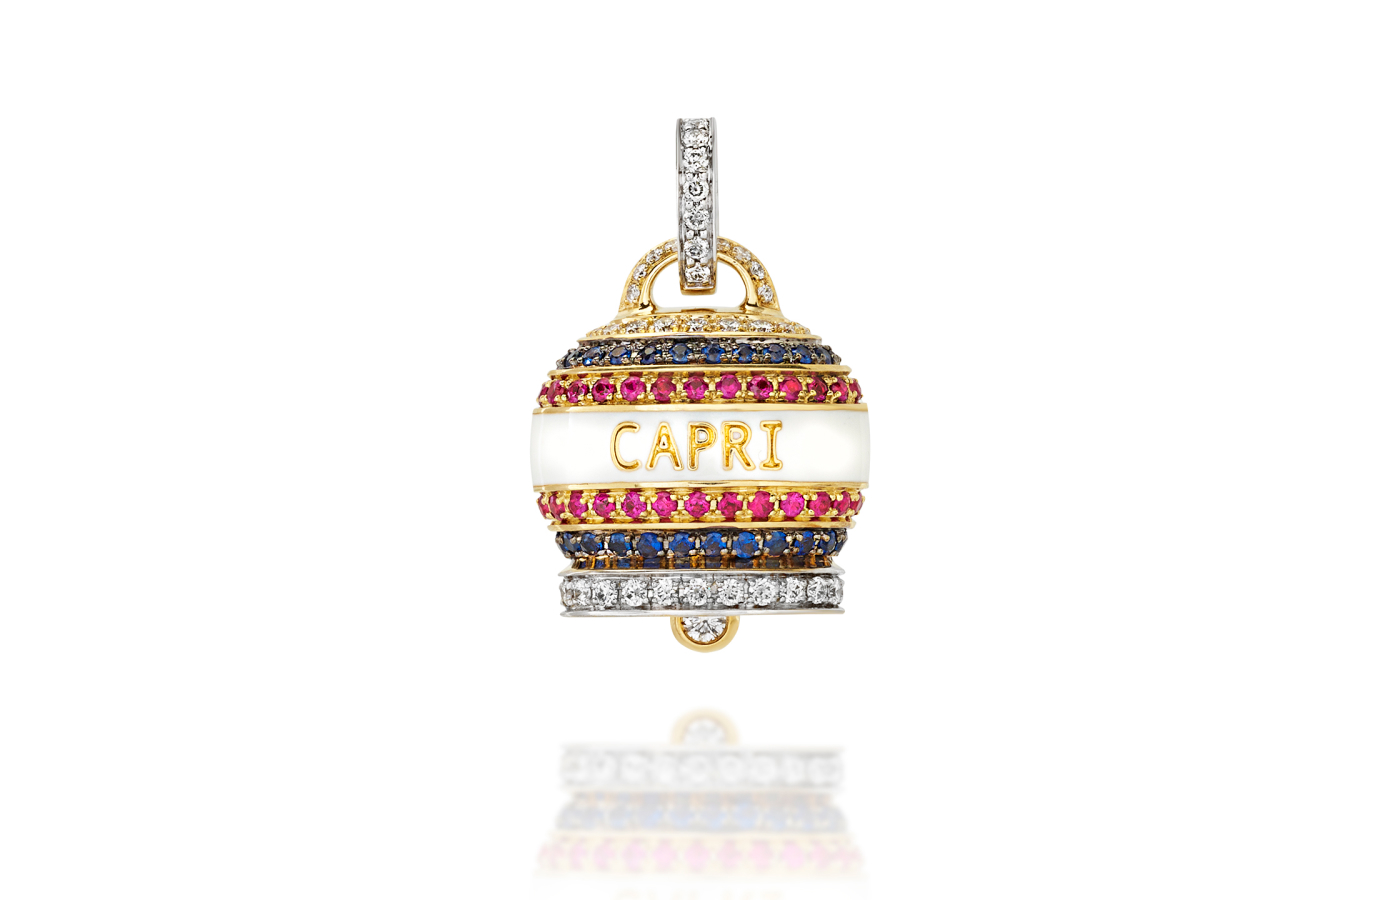 Chantecler Campanella Capriness charm in gold, white gold, white enamel, ruby, sapphire and diamond